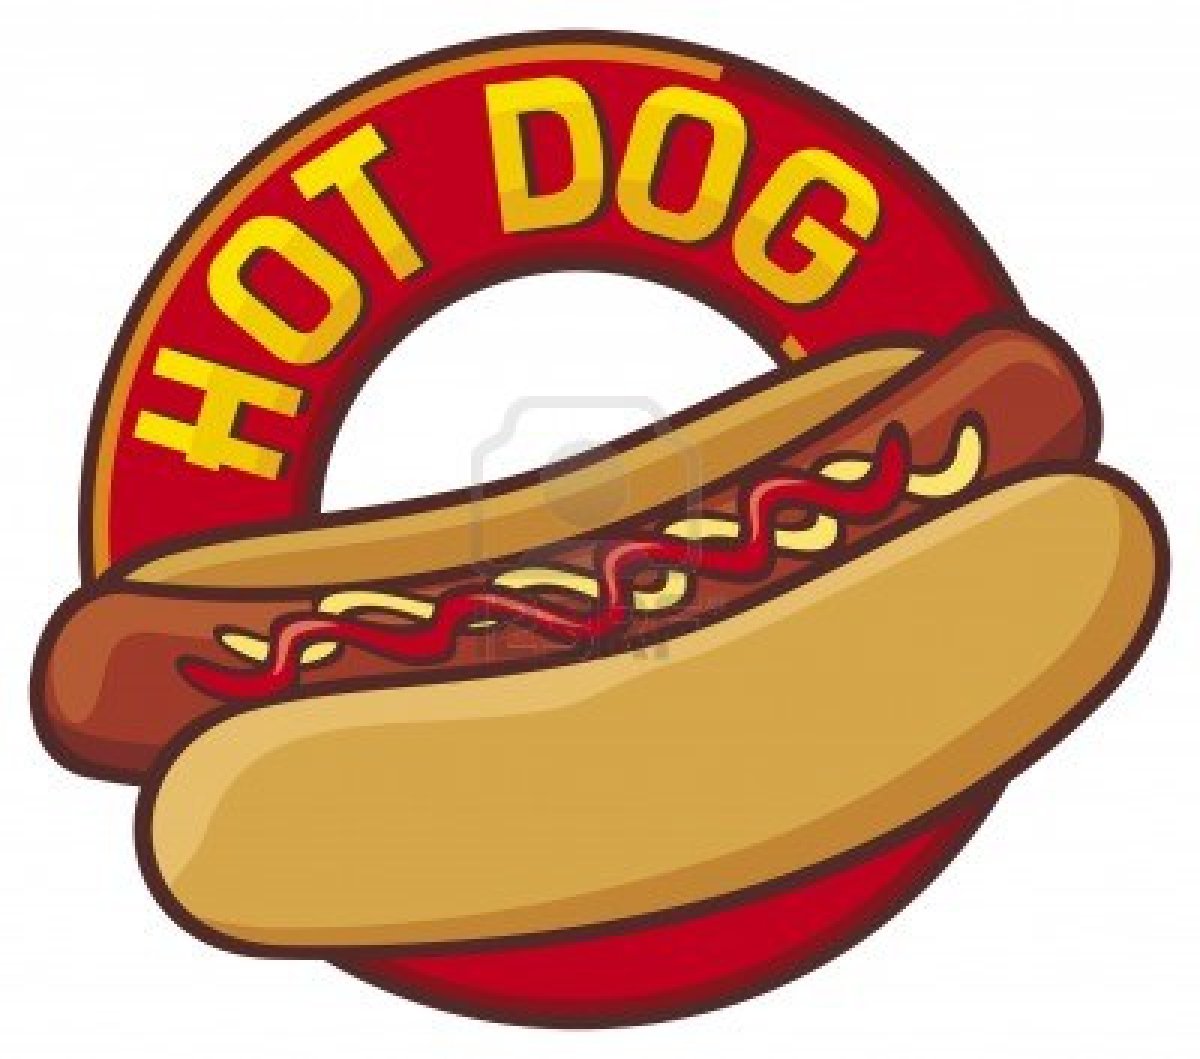 free clipart hot dogs - photo #37